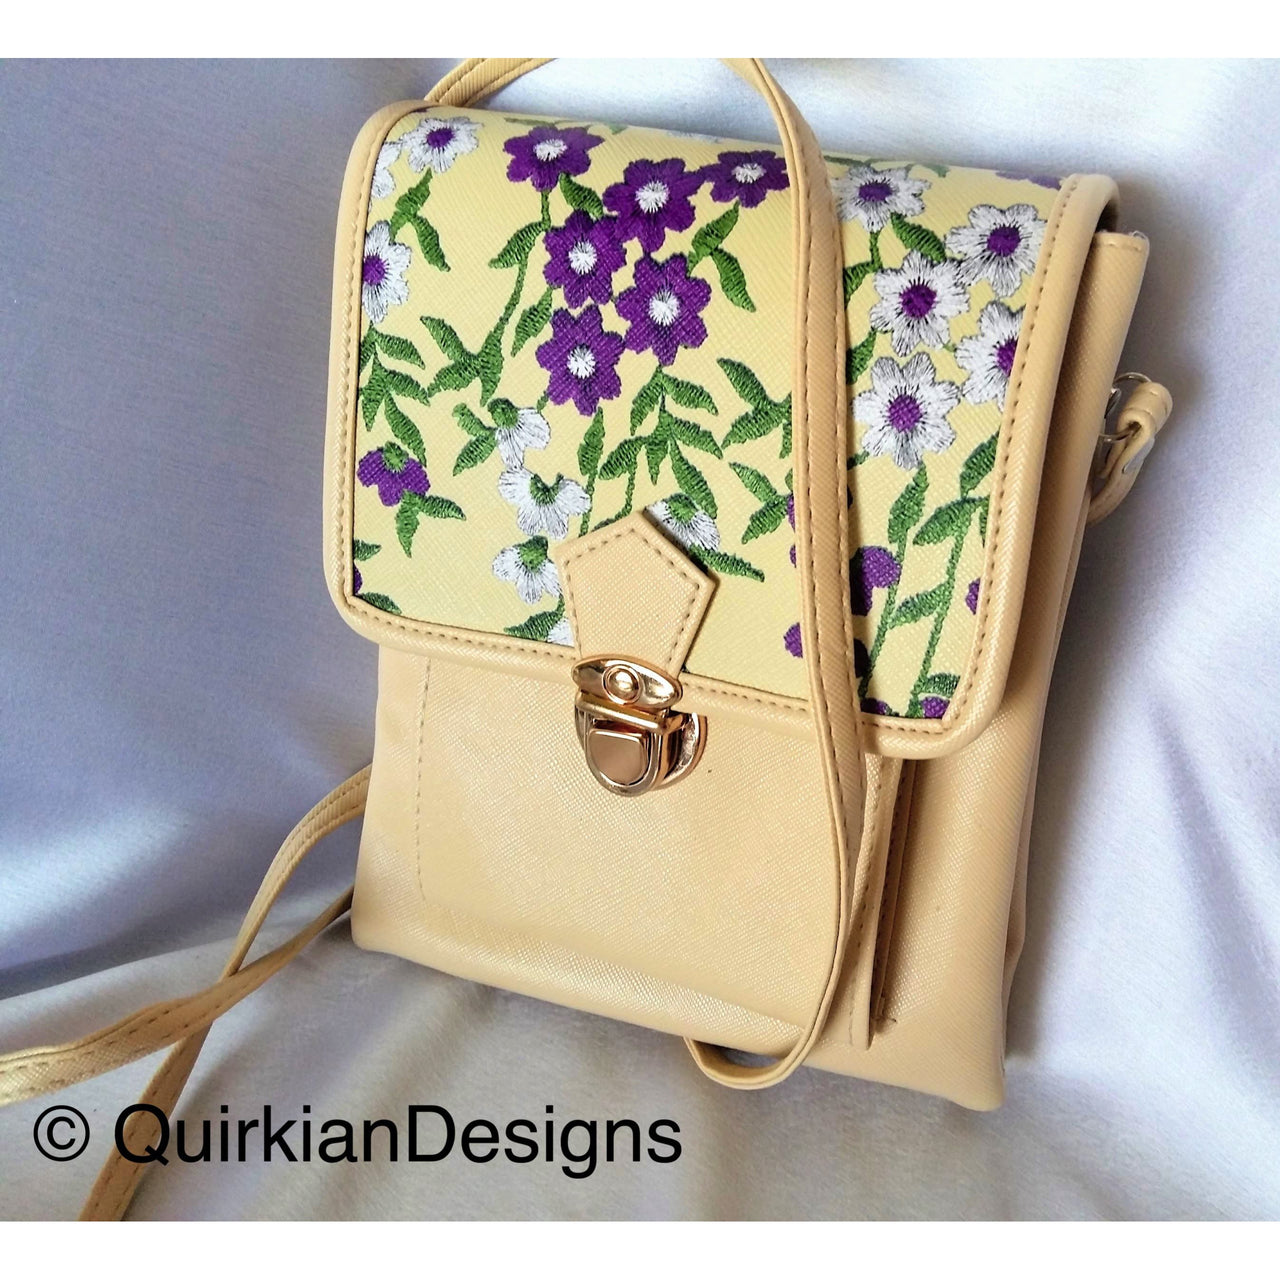 Beige Fake Leather Bag With Purple, Green And White Floral Embroidery Design, Day Clutch, Shopping Crossbody Sling Purse, Faux Leather Bag